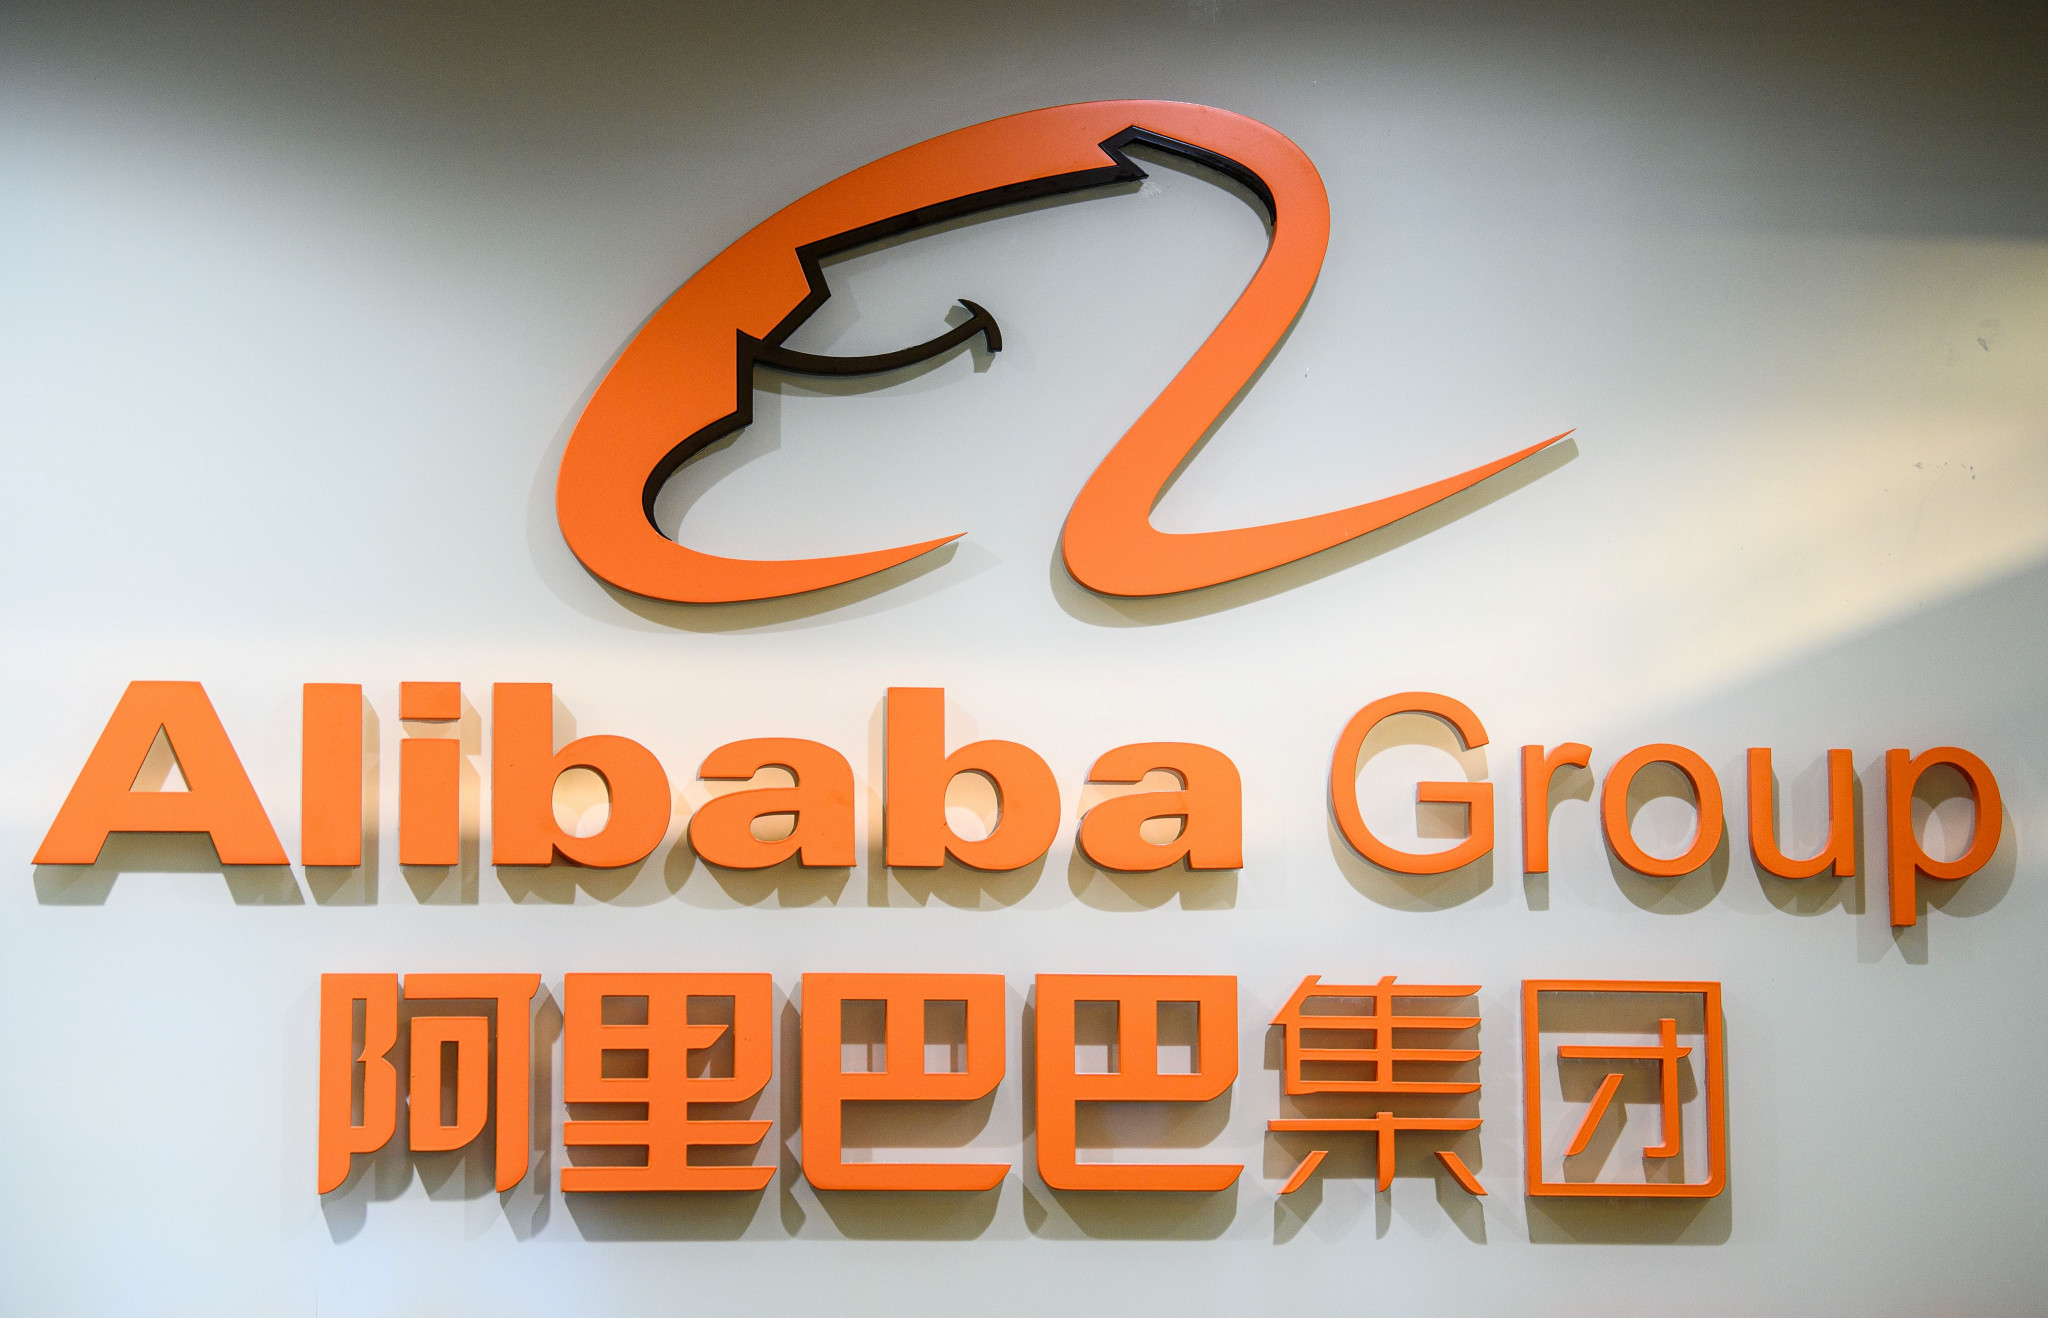 Courier incident adds to IOC sponsor Alibaba’s bad news glut